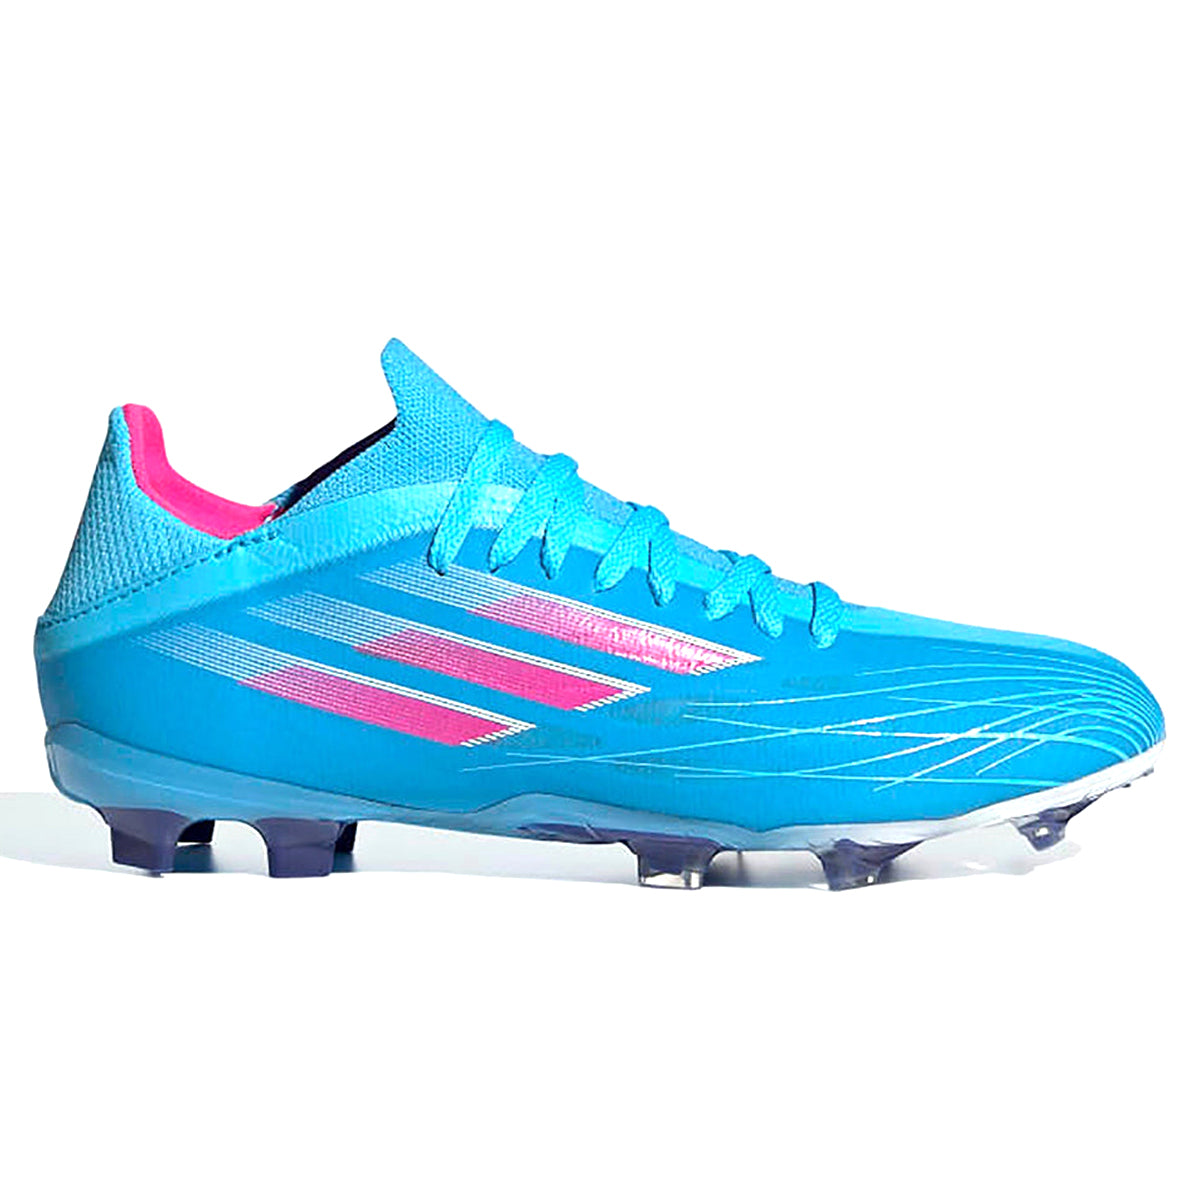 adidas Youth X Speedflow.1 FG Soccer Cleats | GW7461 Soccer Shoes Adidas 1 SKY RUSH/TEAM SHOCK PINK/FTWR WHITE 